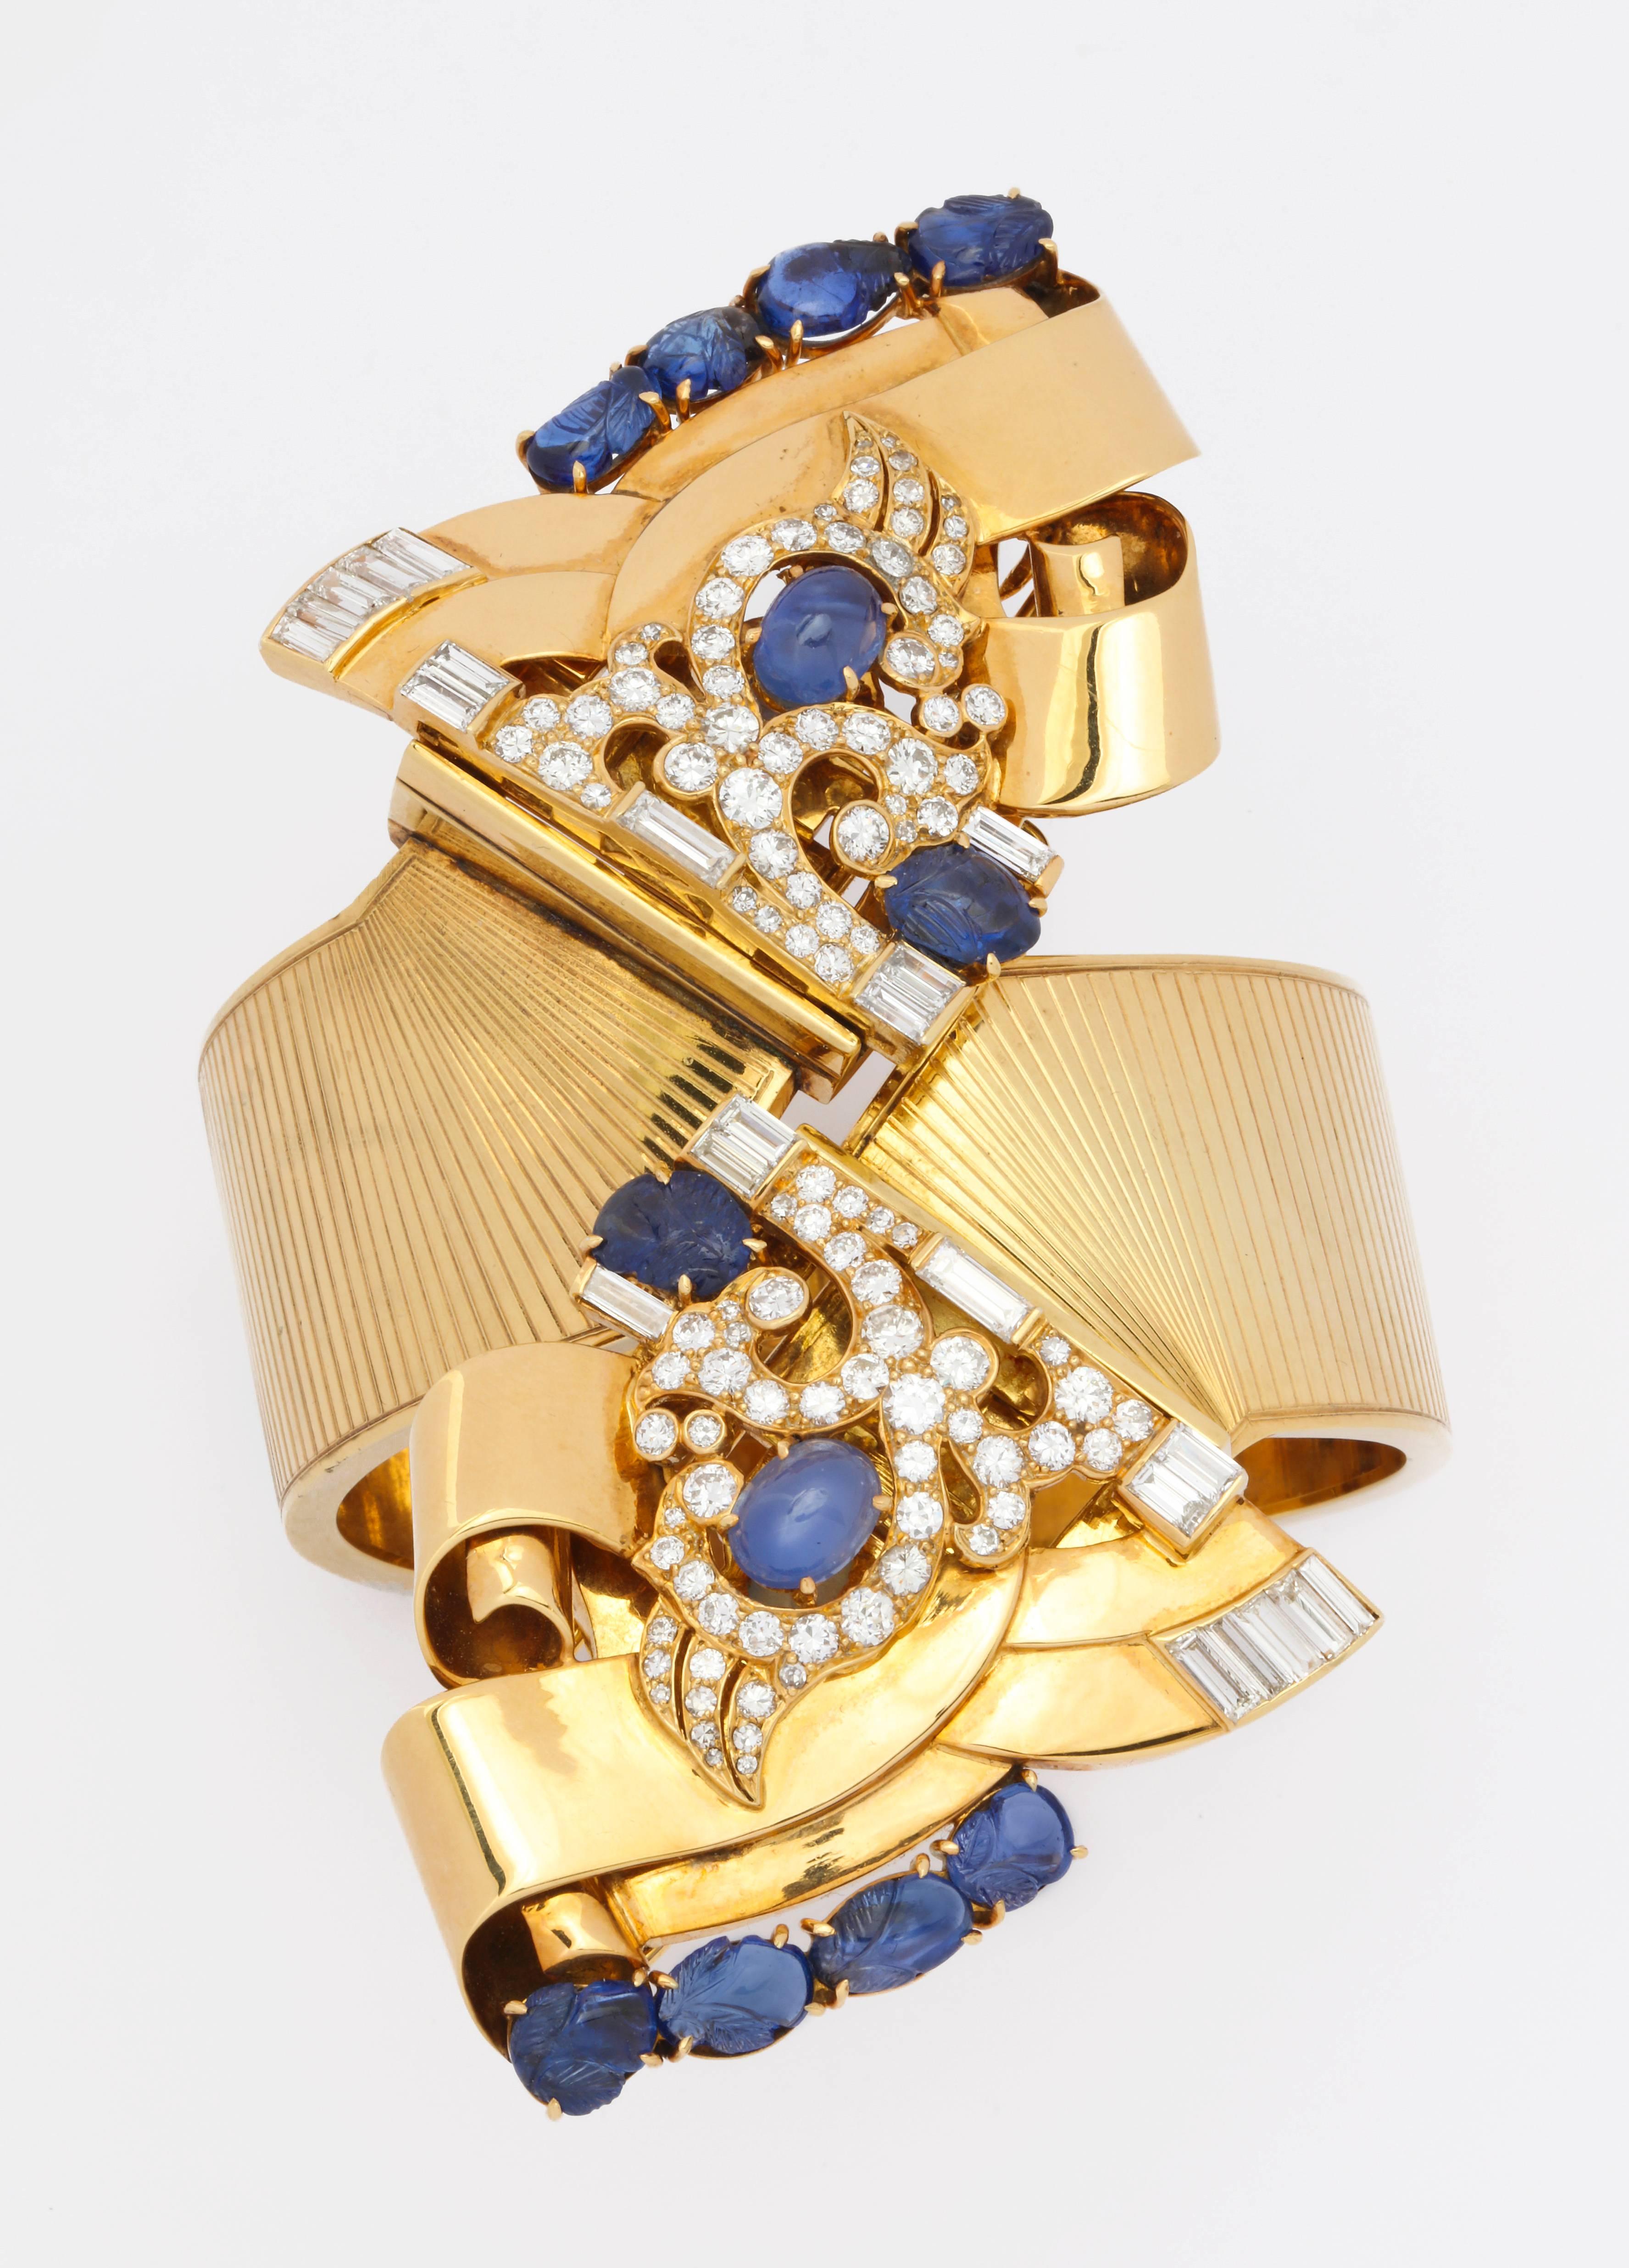 A stunning custom made 1930s Hollywood style, society bracelet in 14K gold by E.M. Battle, featuring removable dress clips set with 52 round diamonds of 1.65 cts, and 22 baguette diamonds of 2.20 cts,, as well as 12 cabochon and carved sapphires of